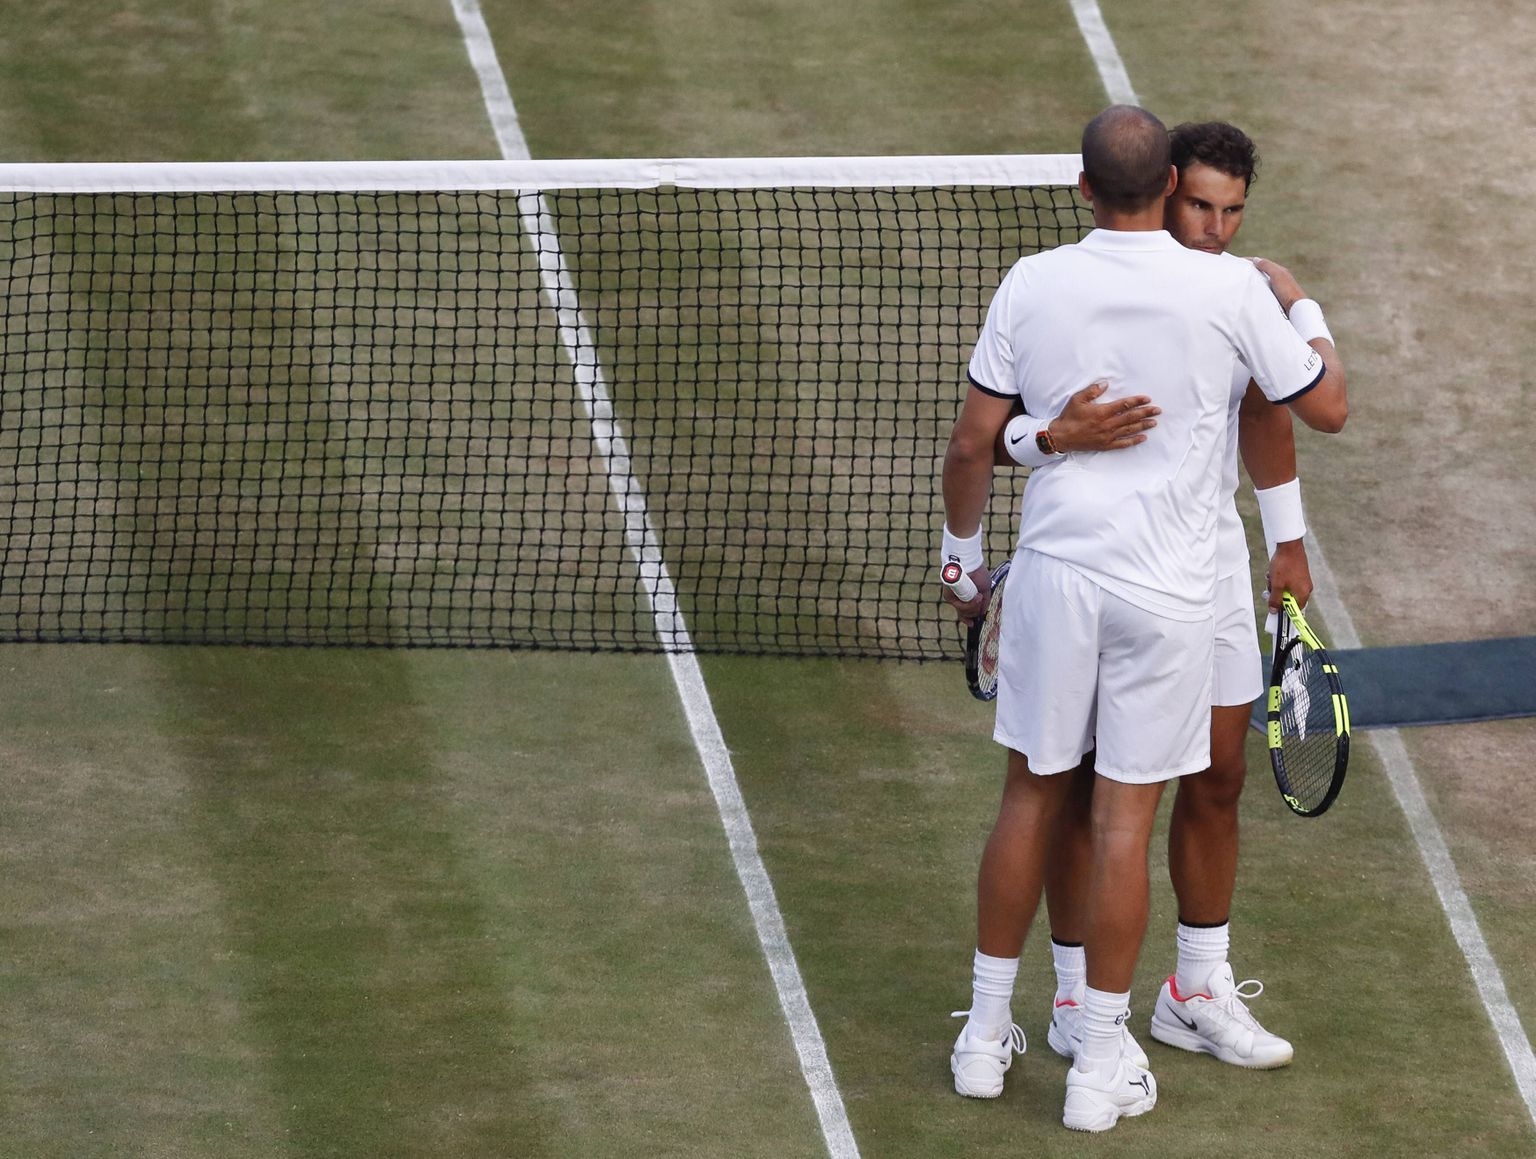 Bilder des Tages - SPORT  (170711) -- LONDON, July 11, 2017 -- Rafael Nadal (R) of Spain greets Gilles Muller of Luxembourg after their men s singles fourth round match at the Championship Wimbledon 2017 in London, Britain on July 10, 2017. Nadal lost 2-3. )(wll) (SP)BRITAIN-LONDON-TENNIS-WIMBLEDON-DAY 7 HanxYan PUBLICATIONxNOTxINxCHN

Images the Day Sports 170711 London July 11 2017 Rafael Nadal r of Spain greets Gilles Muller of Luxembourg After their Men s Singles Fourth Round Match AT The Championship Wimbledon 2017 in London Britain ON July 10 2017 Nadal Lost 2 3 wll SP Britain London Tennis Wimbledon Day 7 HanxYan PUBLICATIONxNOTxINxCHN